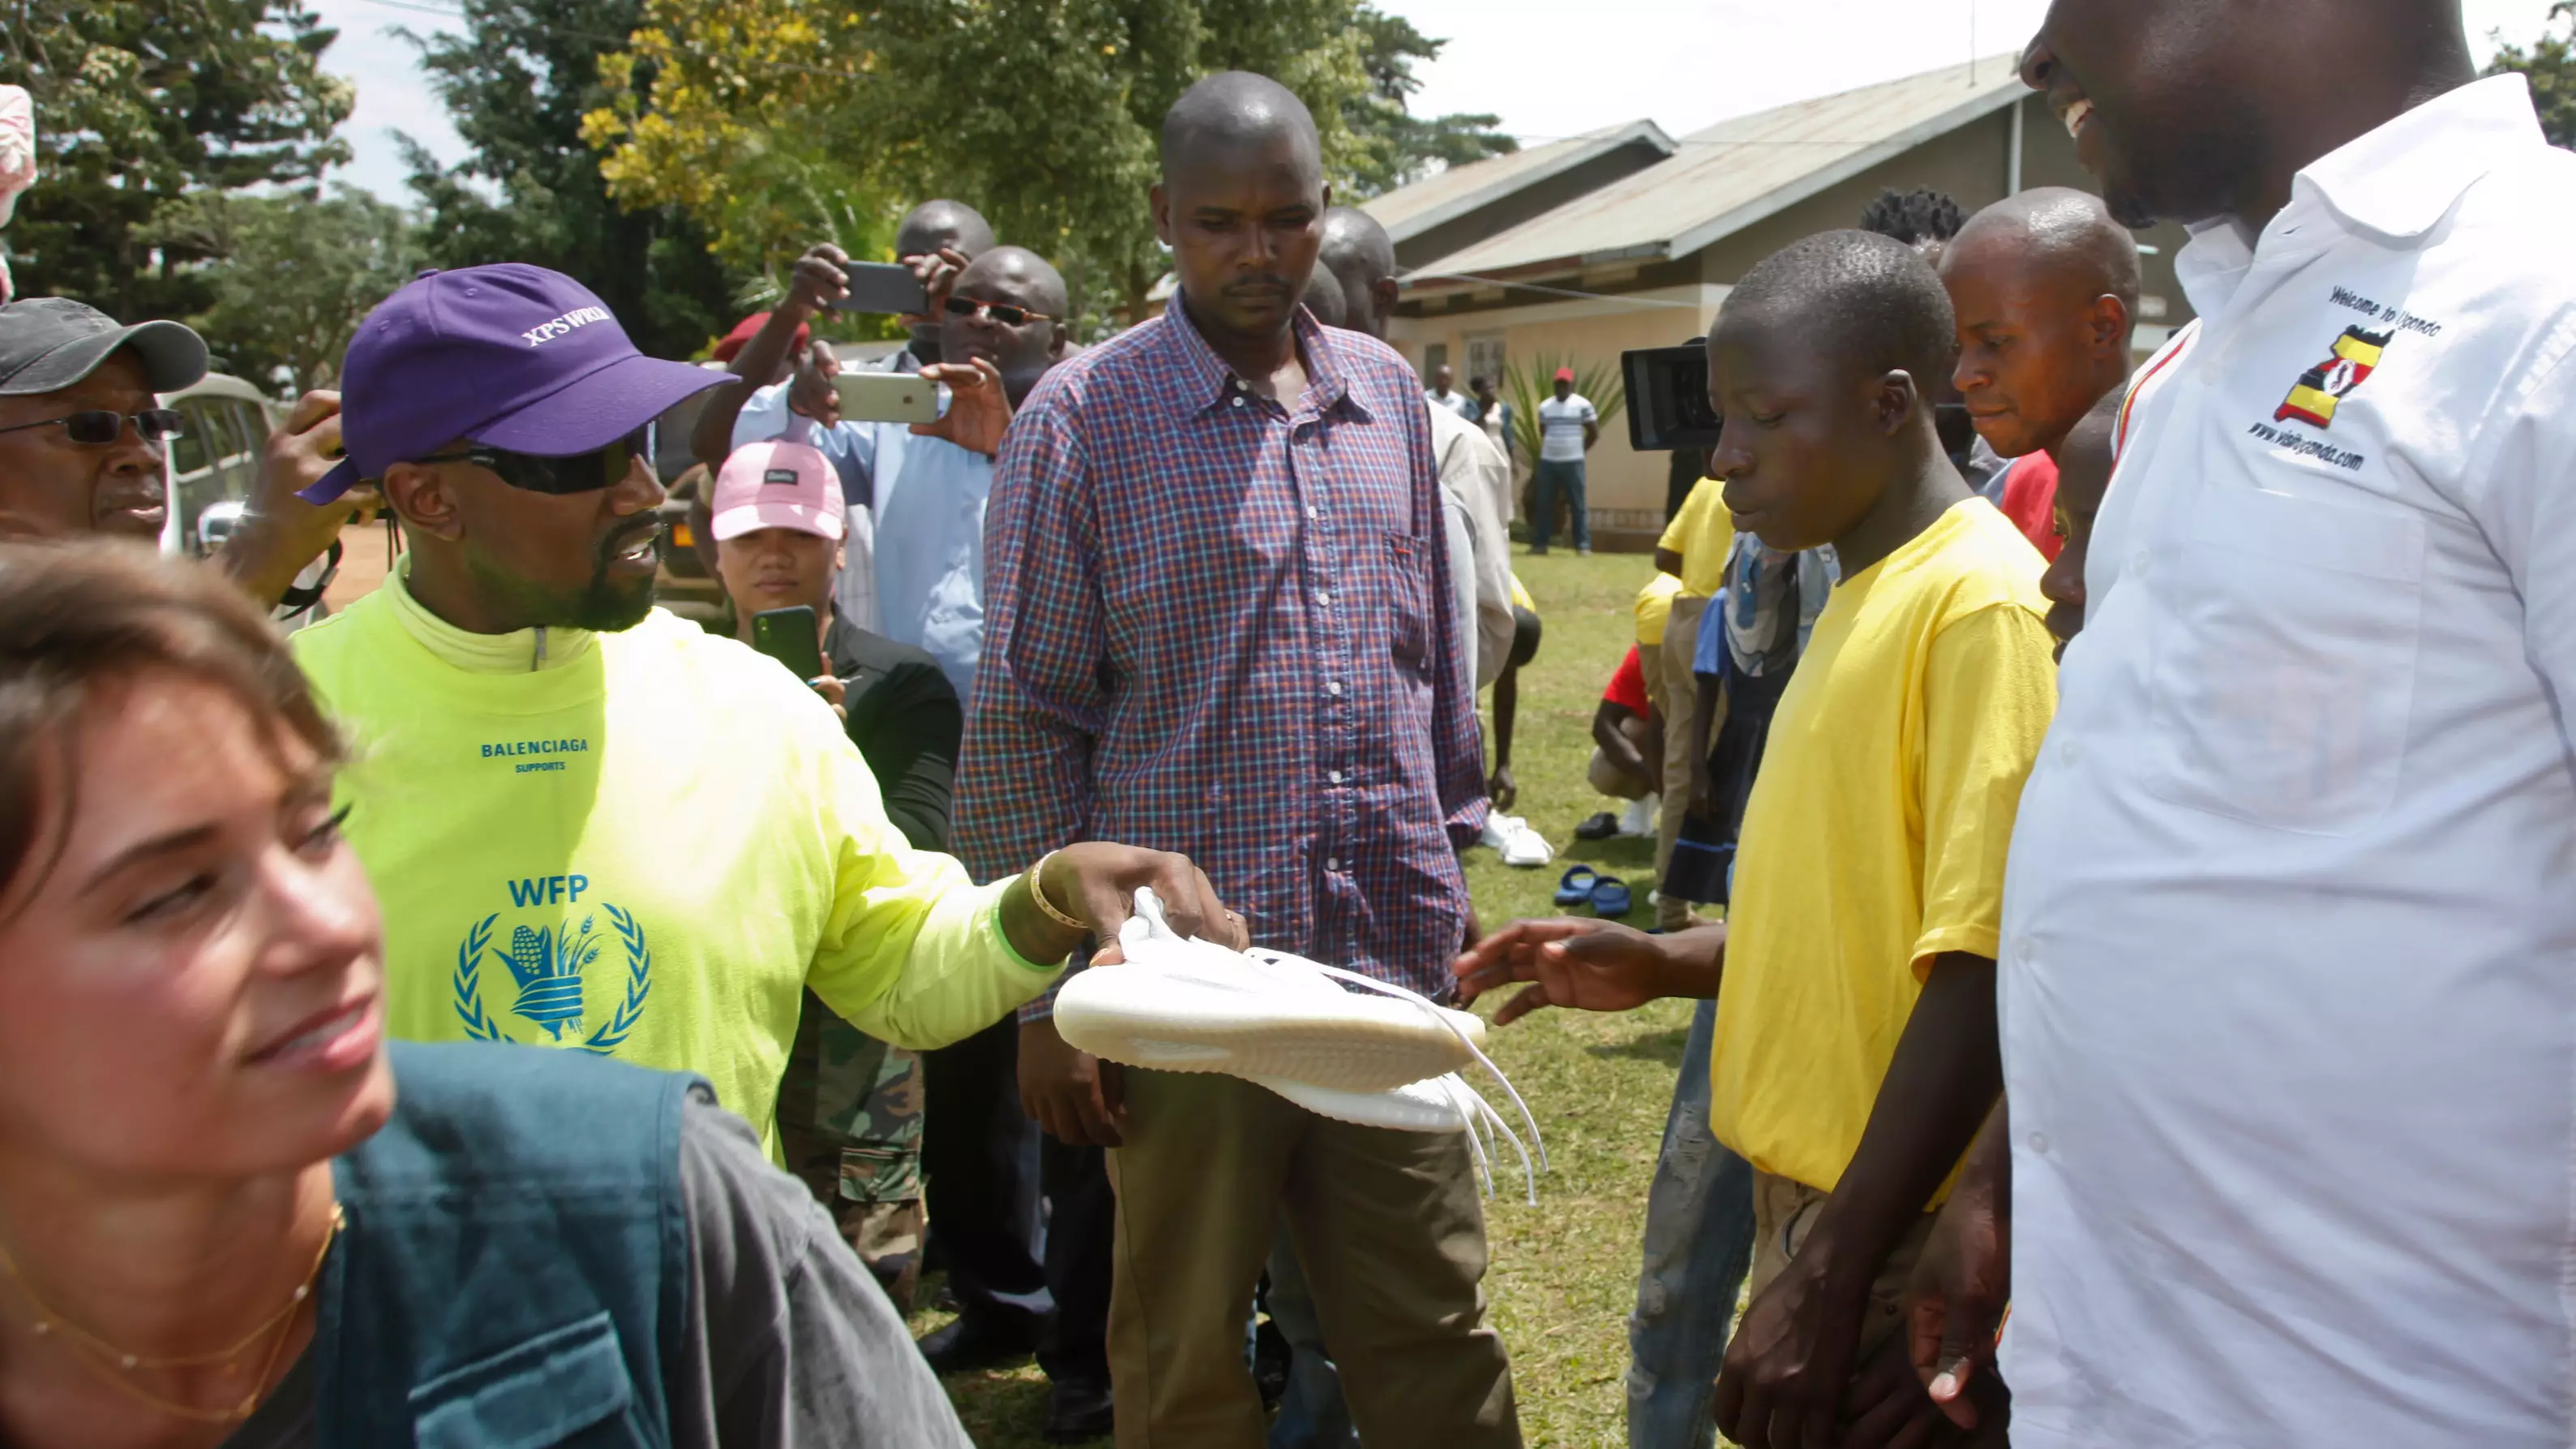 Kanye West Faces Backlash After Giving Out Yeezys To Ugandan Kids